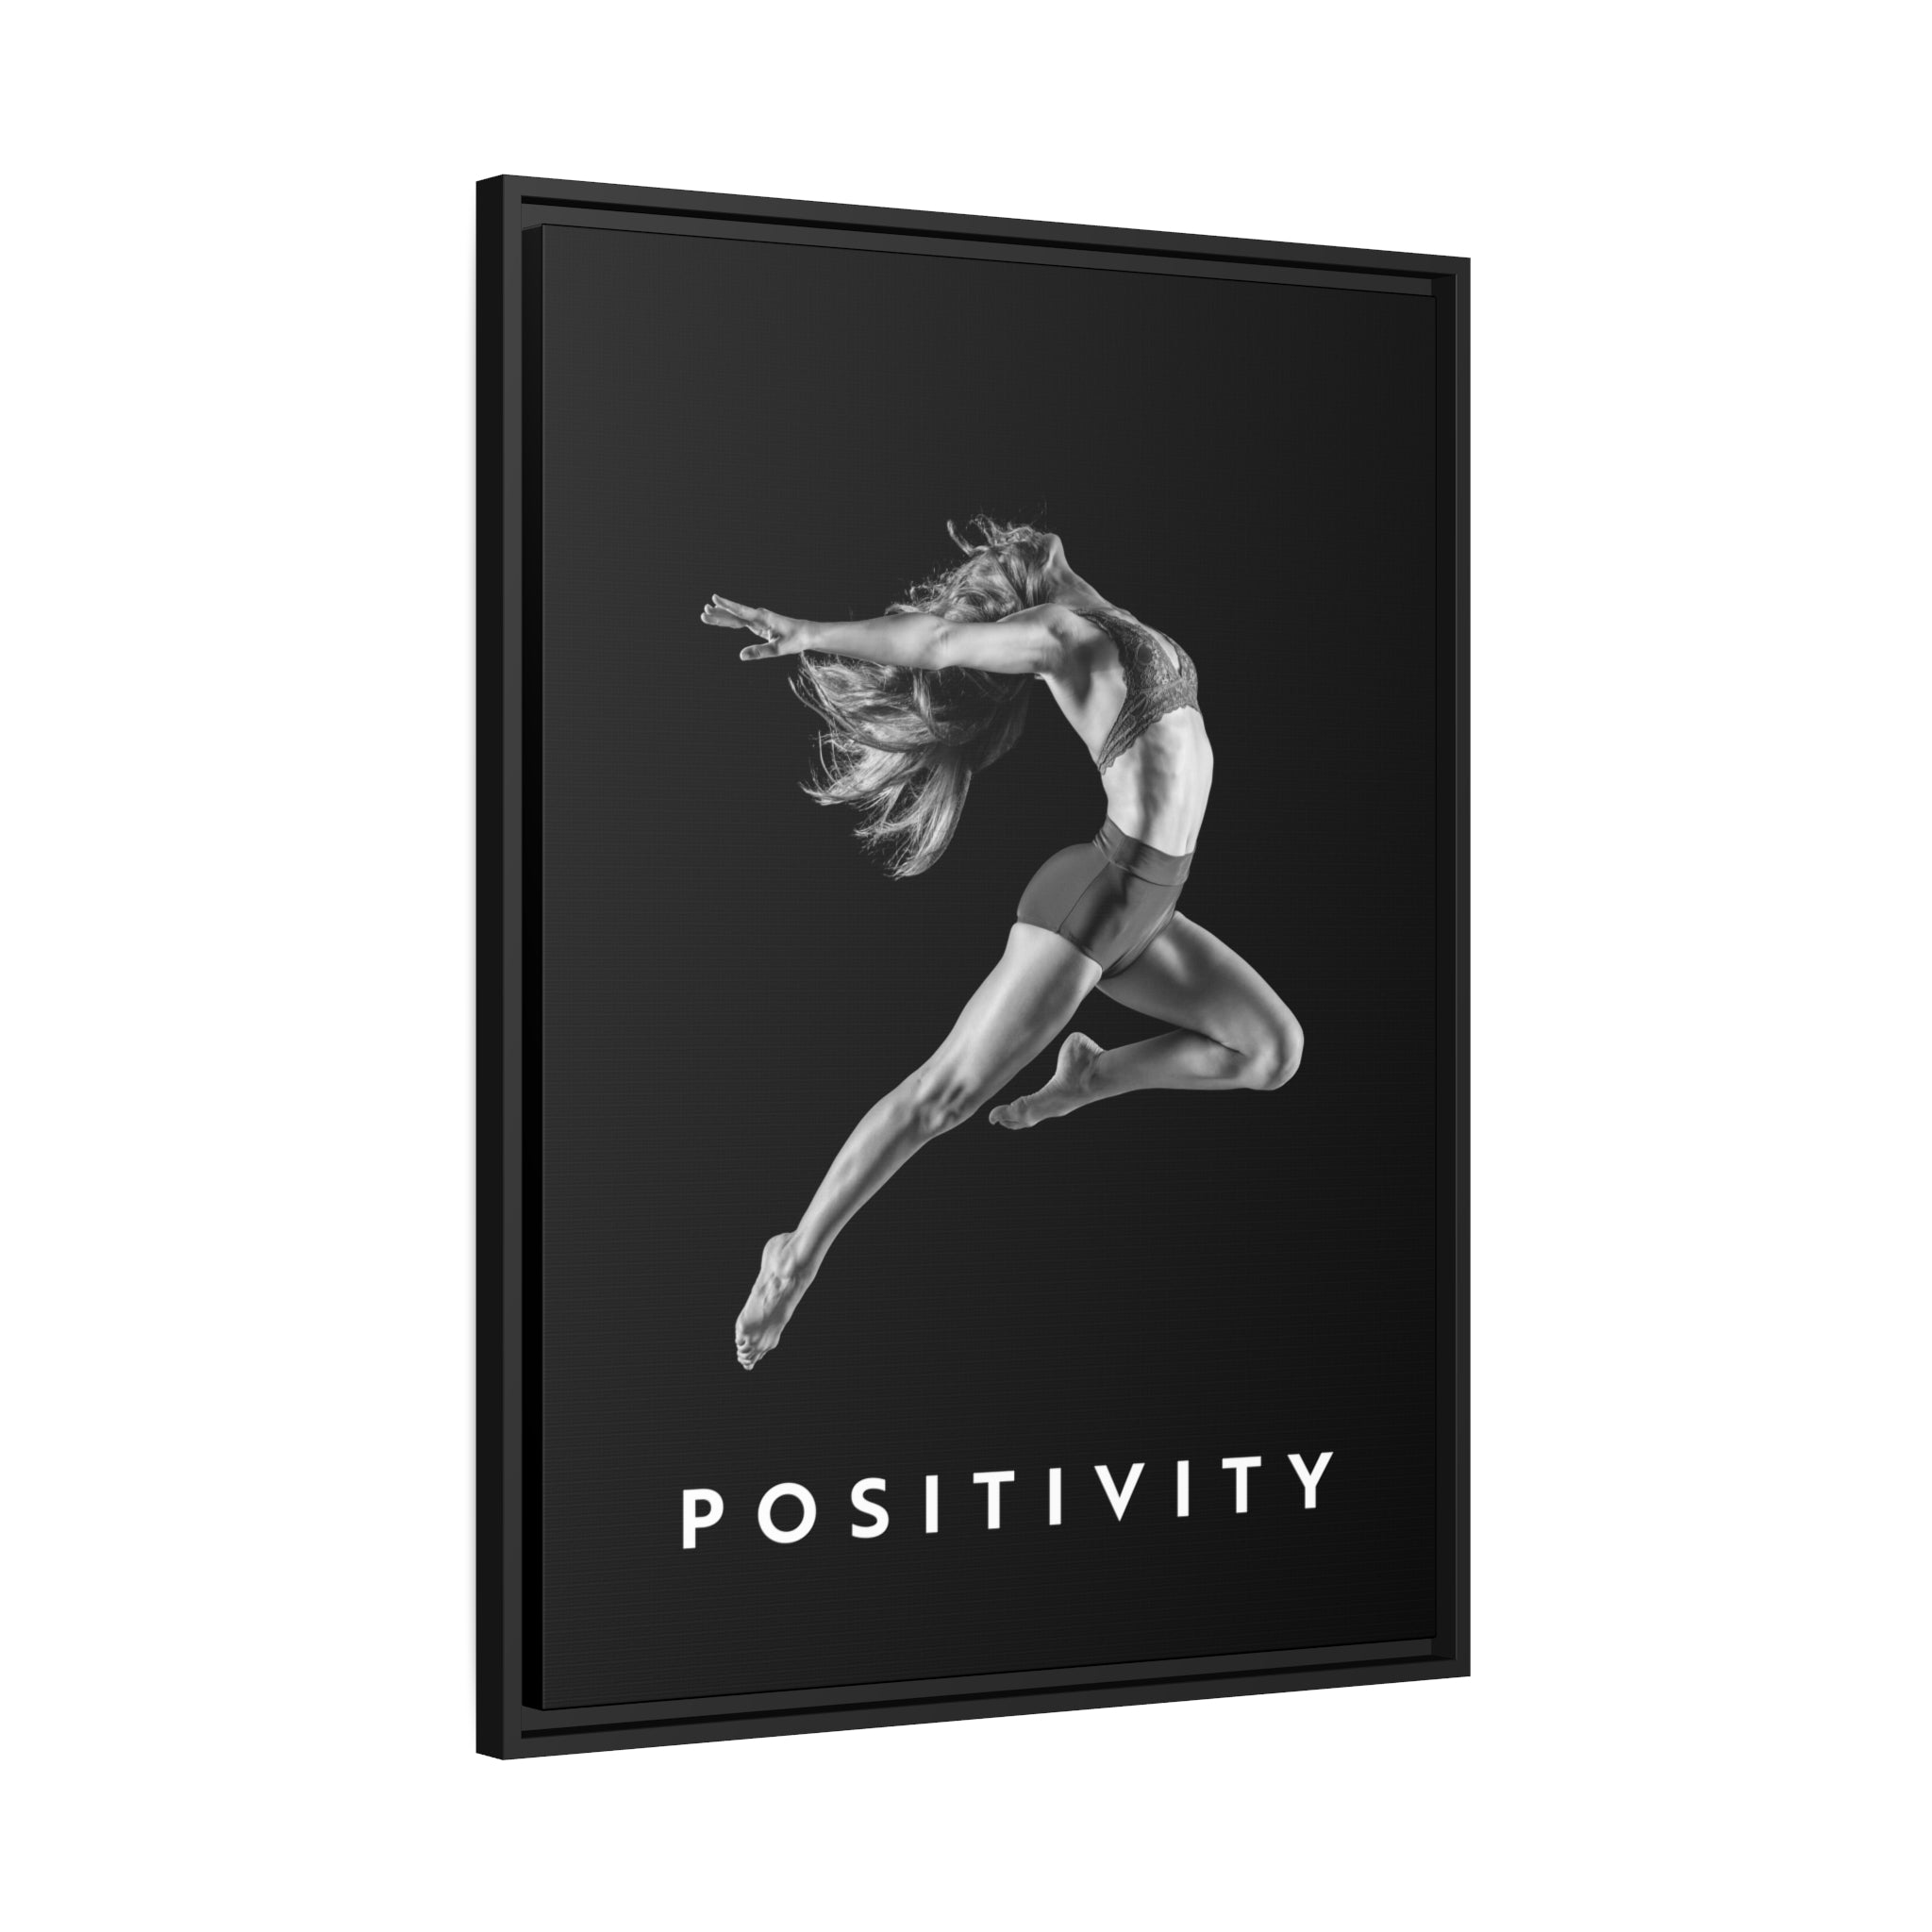 Positivity - Airborne Black And White - Wall Art additional image 6